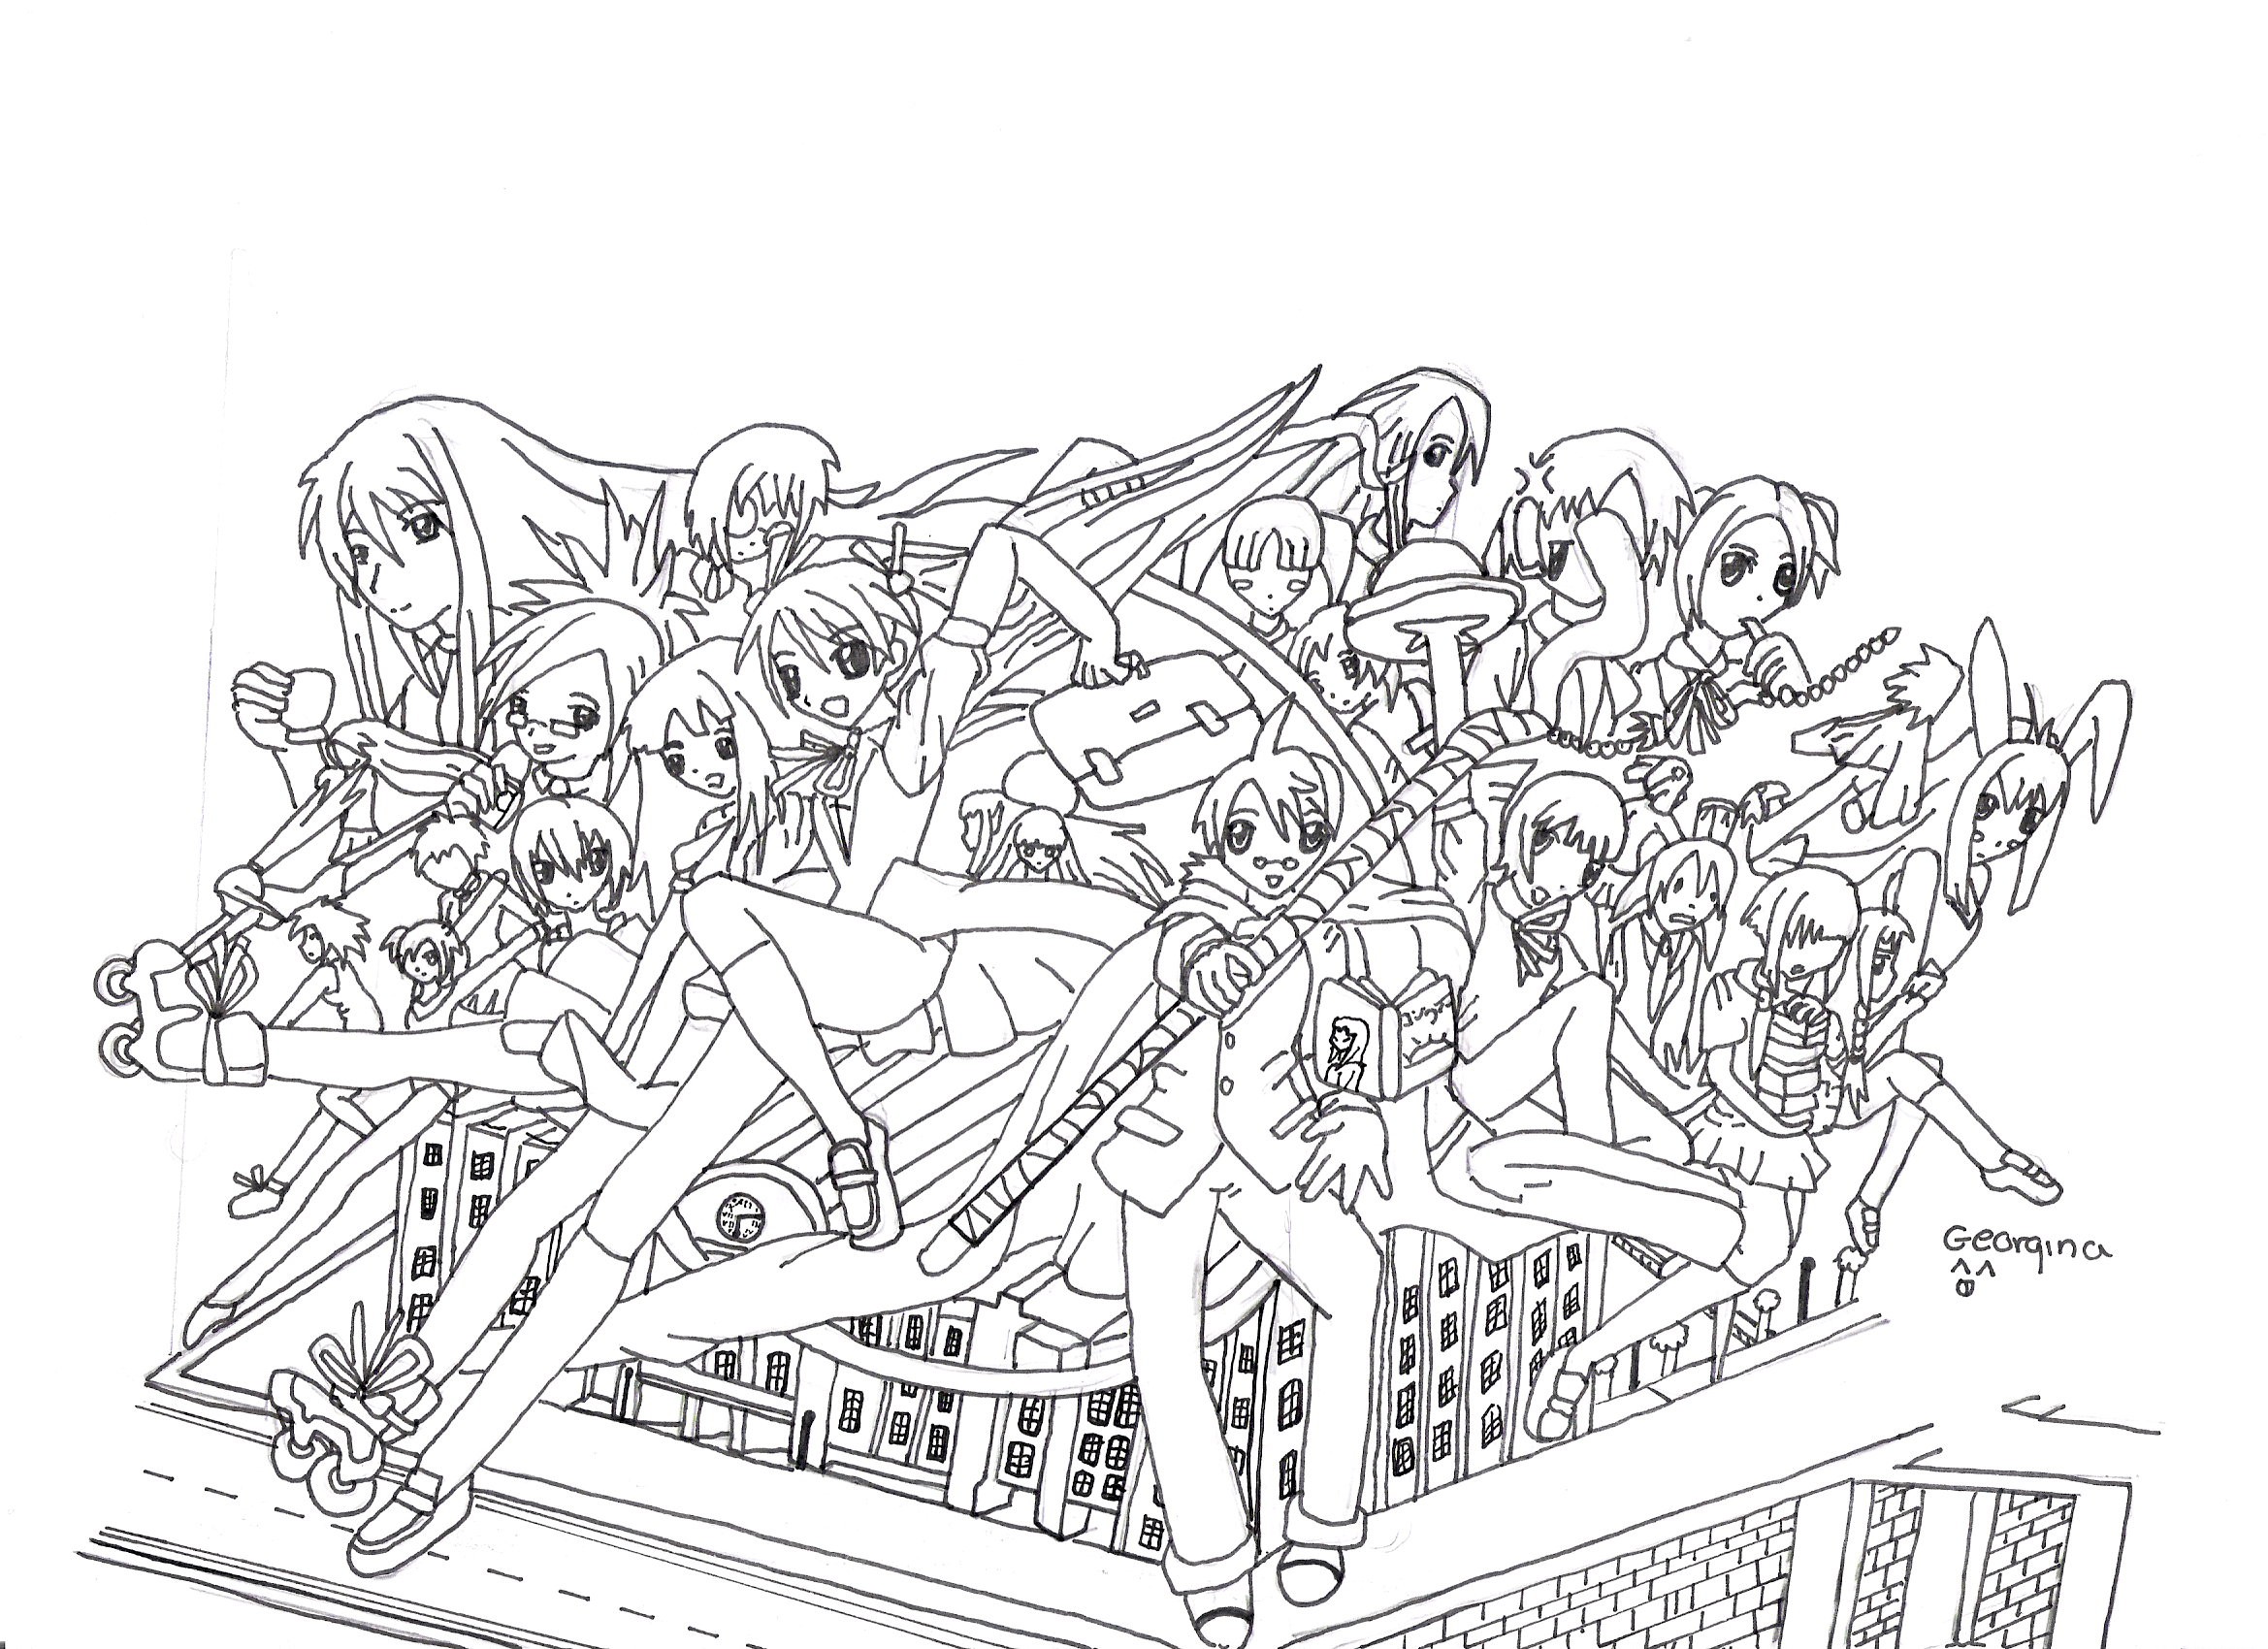 Negima- Group picture (uncoloured) by Qing